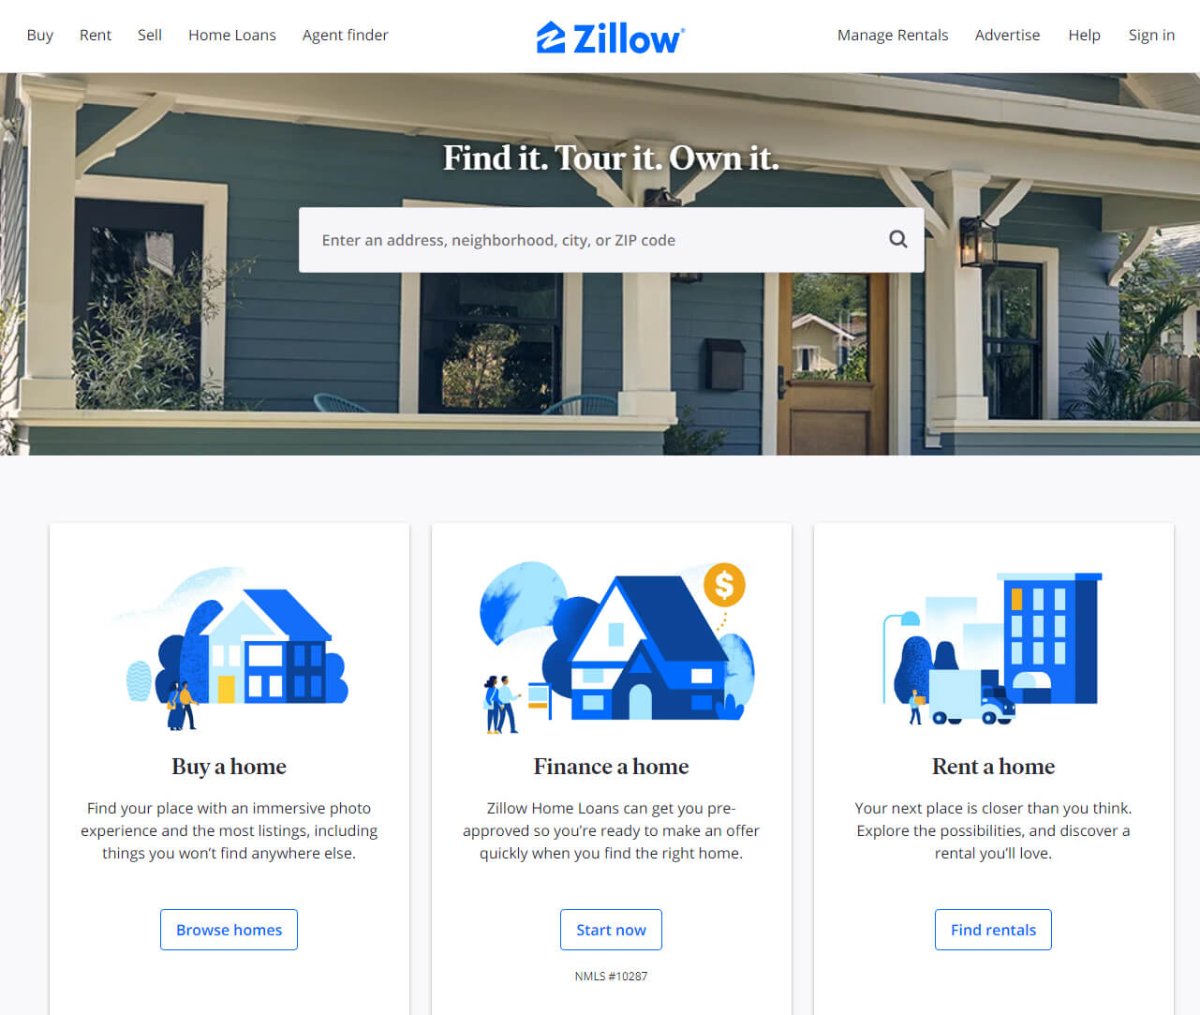 Make an account on Zillow